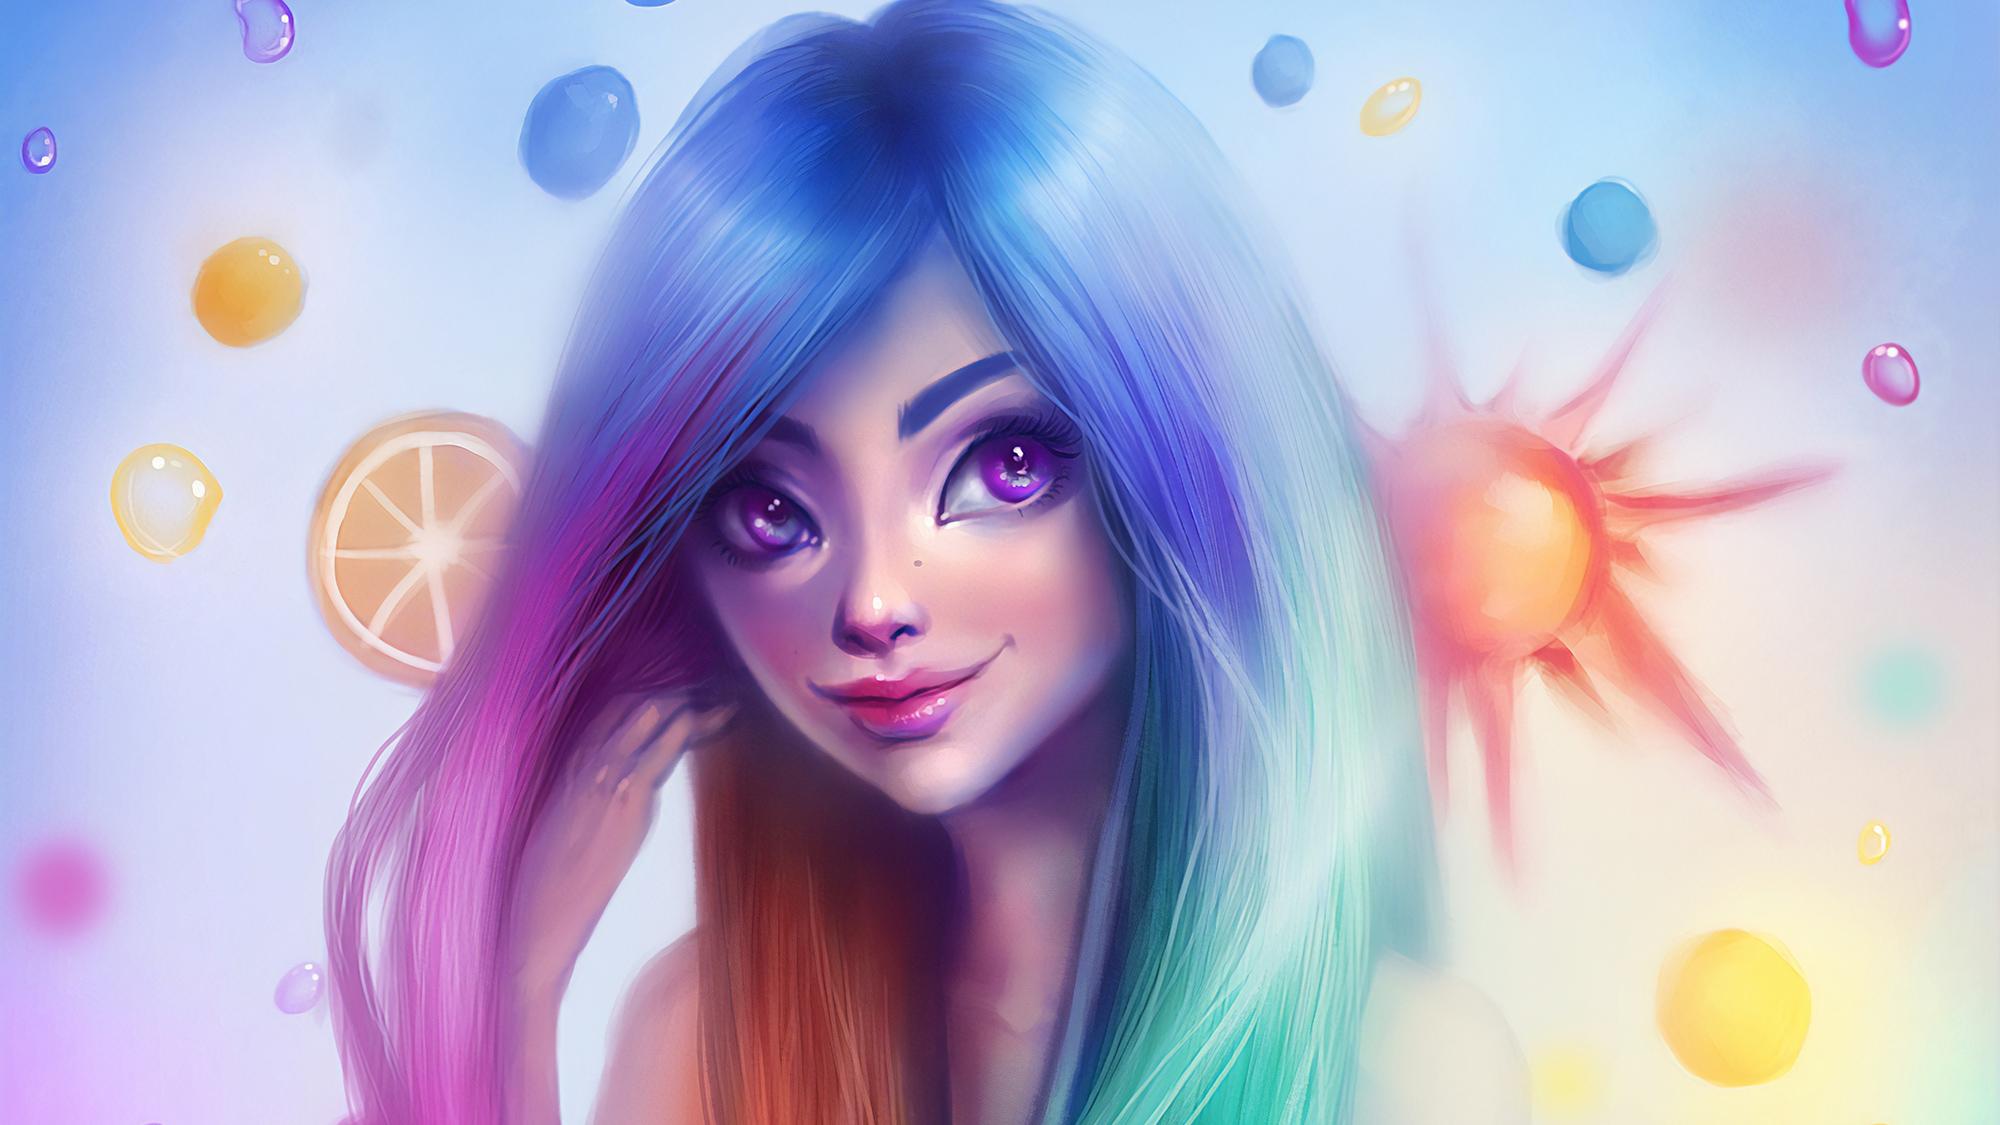 Rainbow Hair Girl, HD Artist, 4k Wallpaper, Image, Background, Photo and Picture